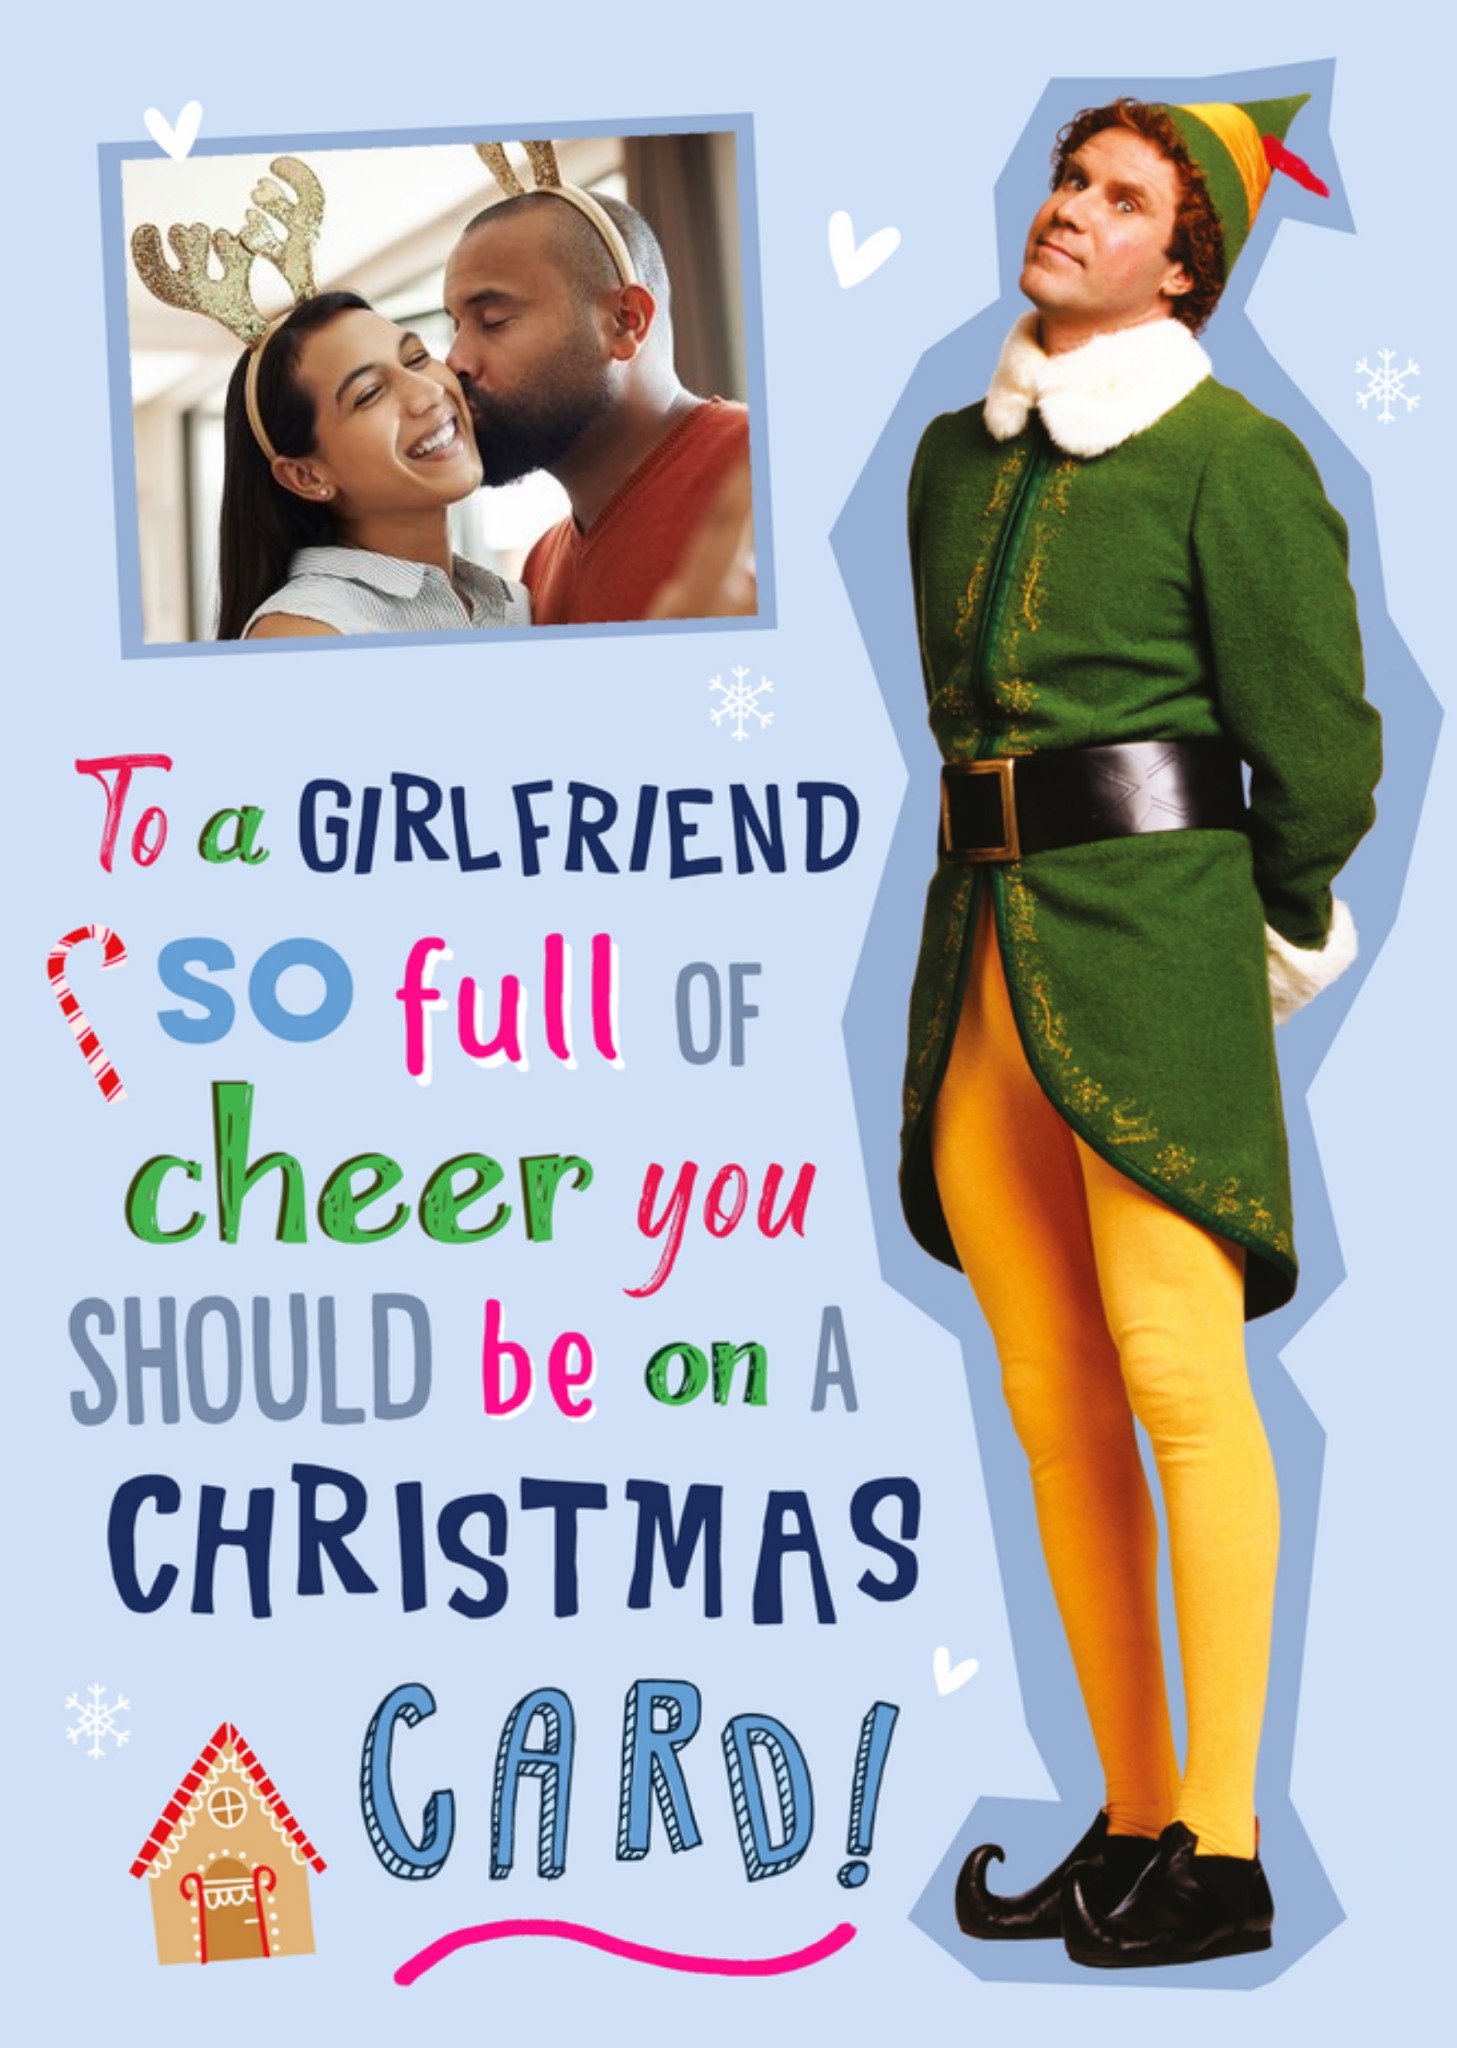 Moonpig Elf The Film Christmas Card To A Girlfriend So Full Of Cheer You Should Be On A Christmas Ca